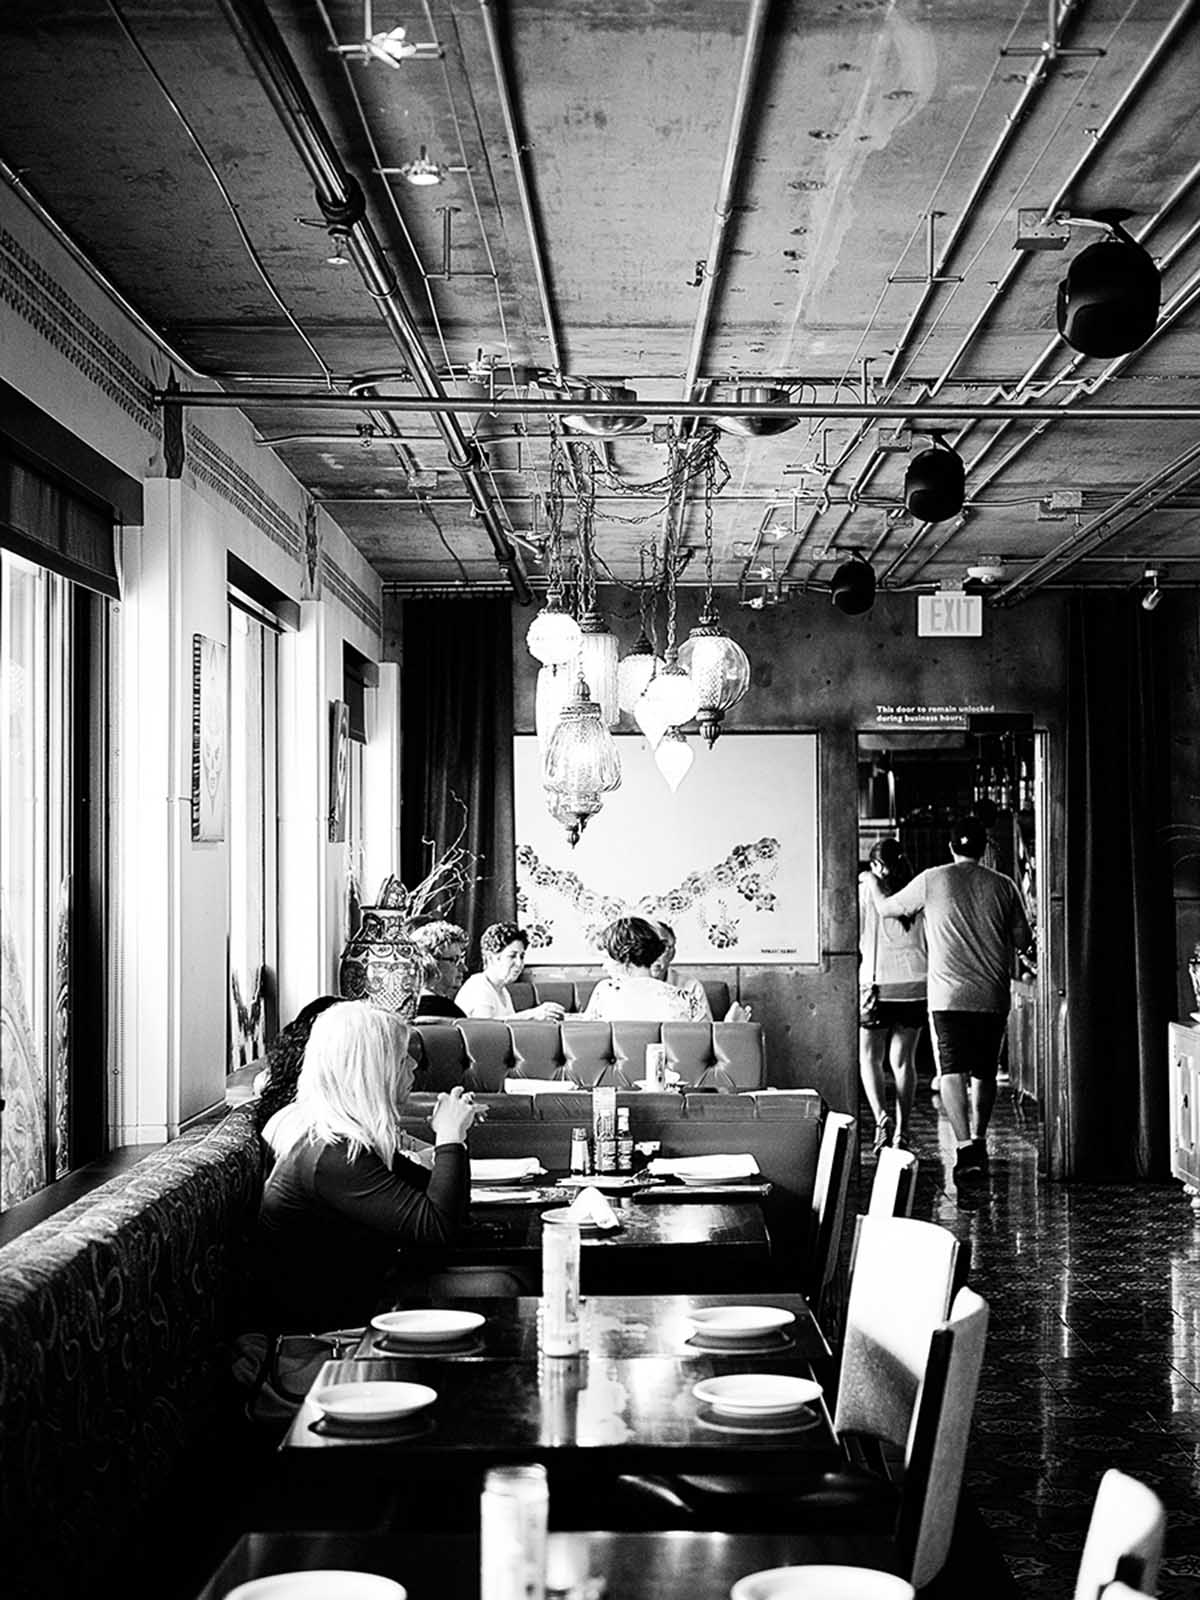 An image of a restaurant in black and white.